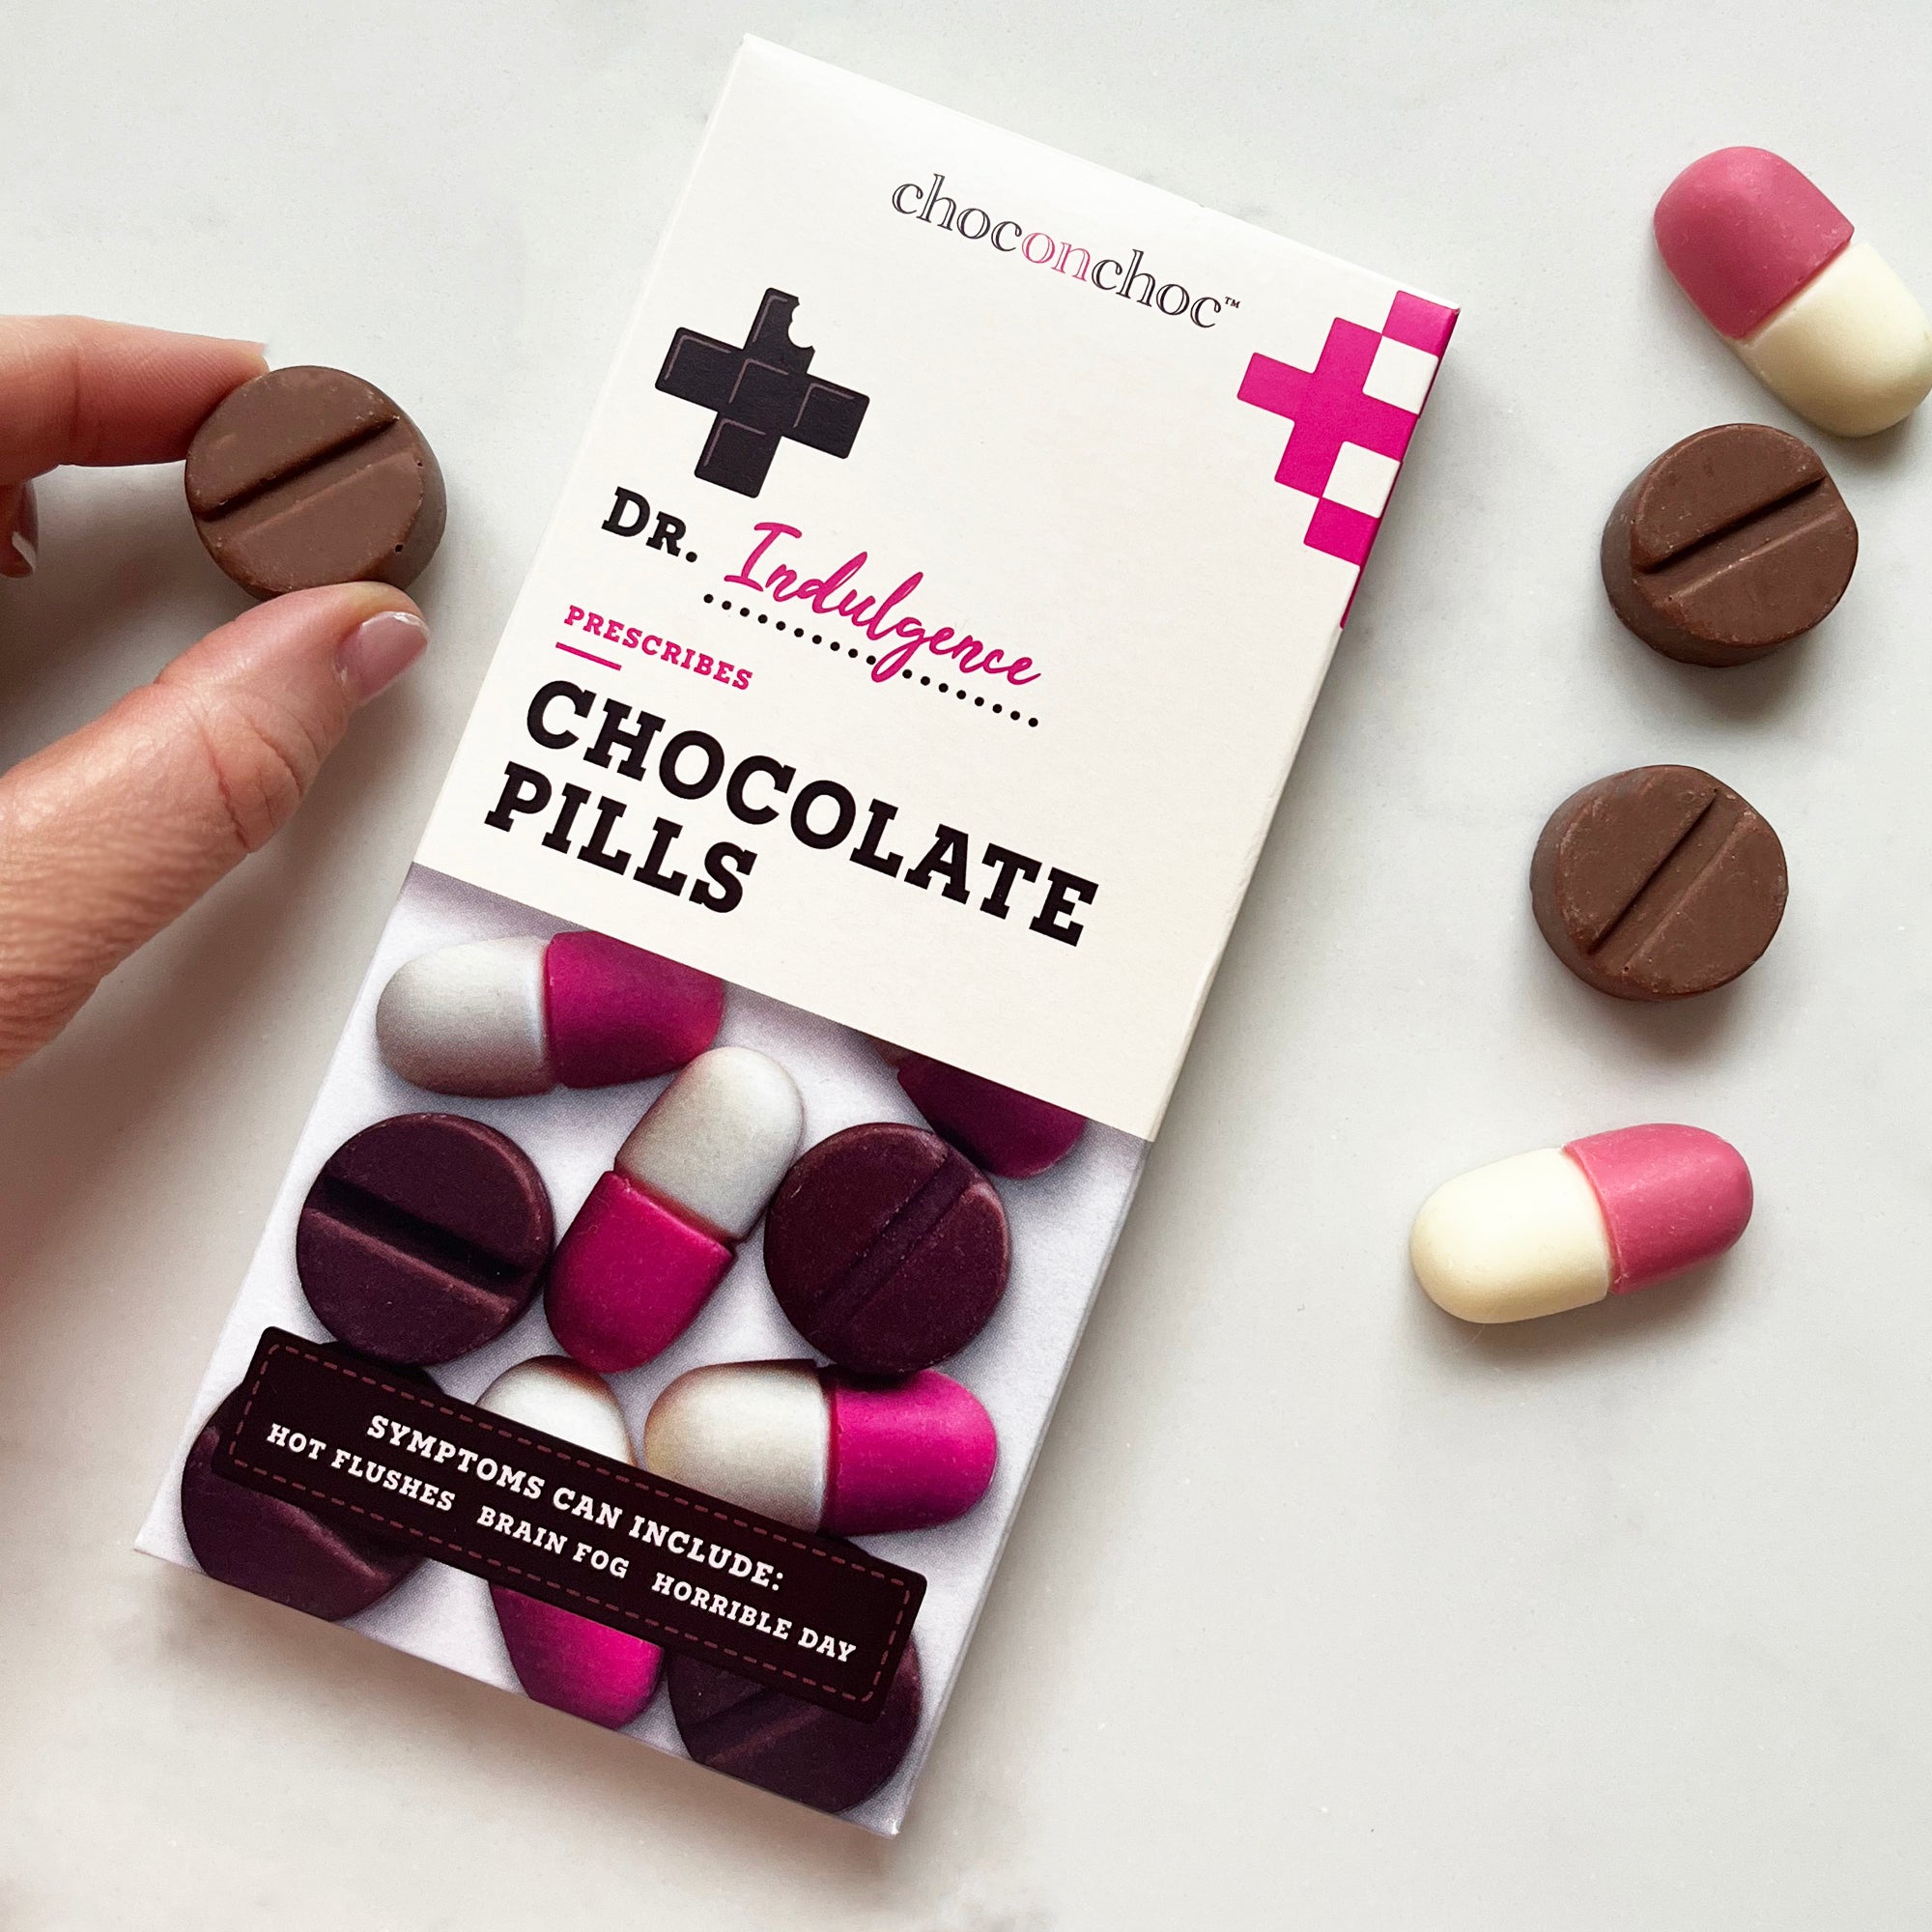 Chocolate Pills by Dr Indulgence